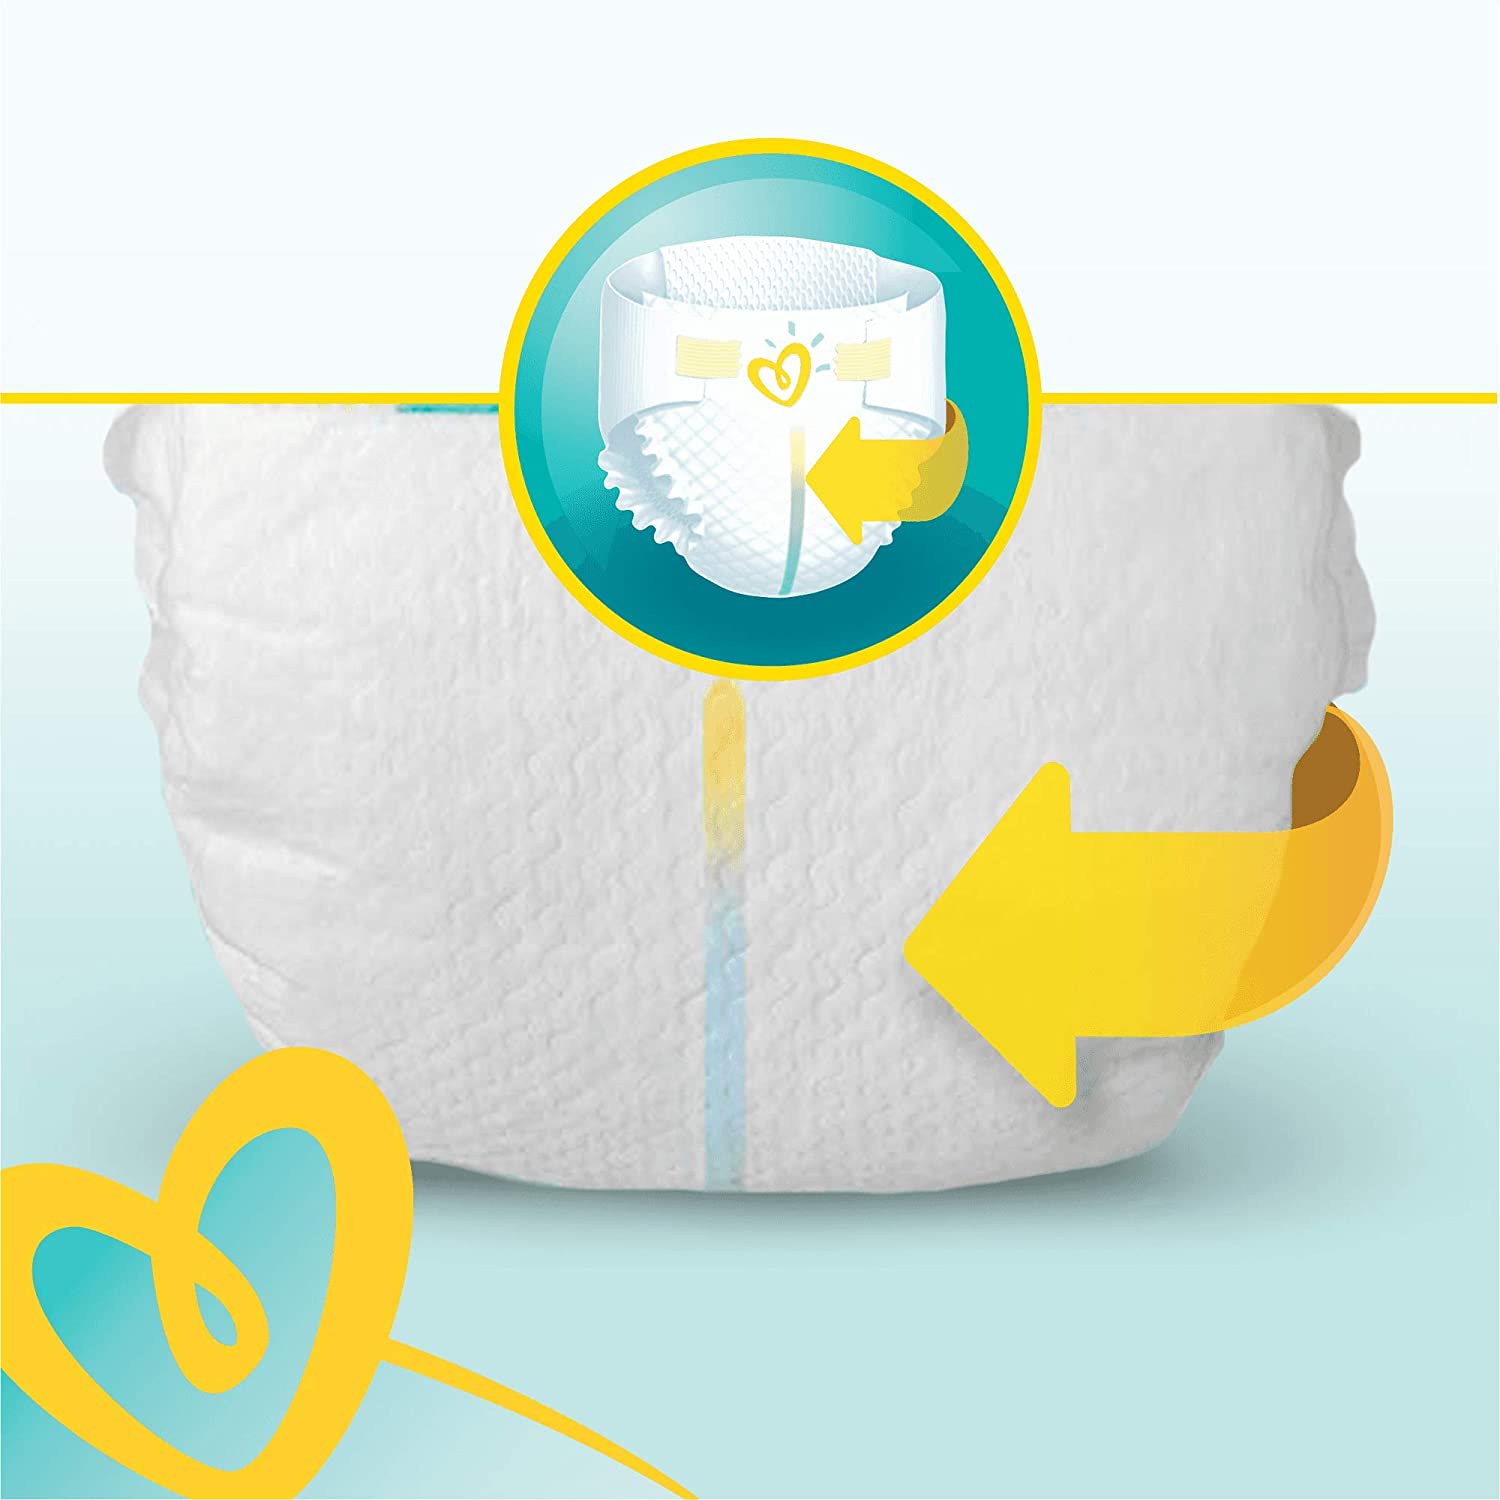 Pampers Premium Protection Diapers Size 1 - 72's (Jumbo Pack)